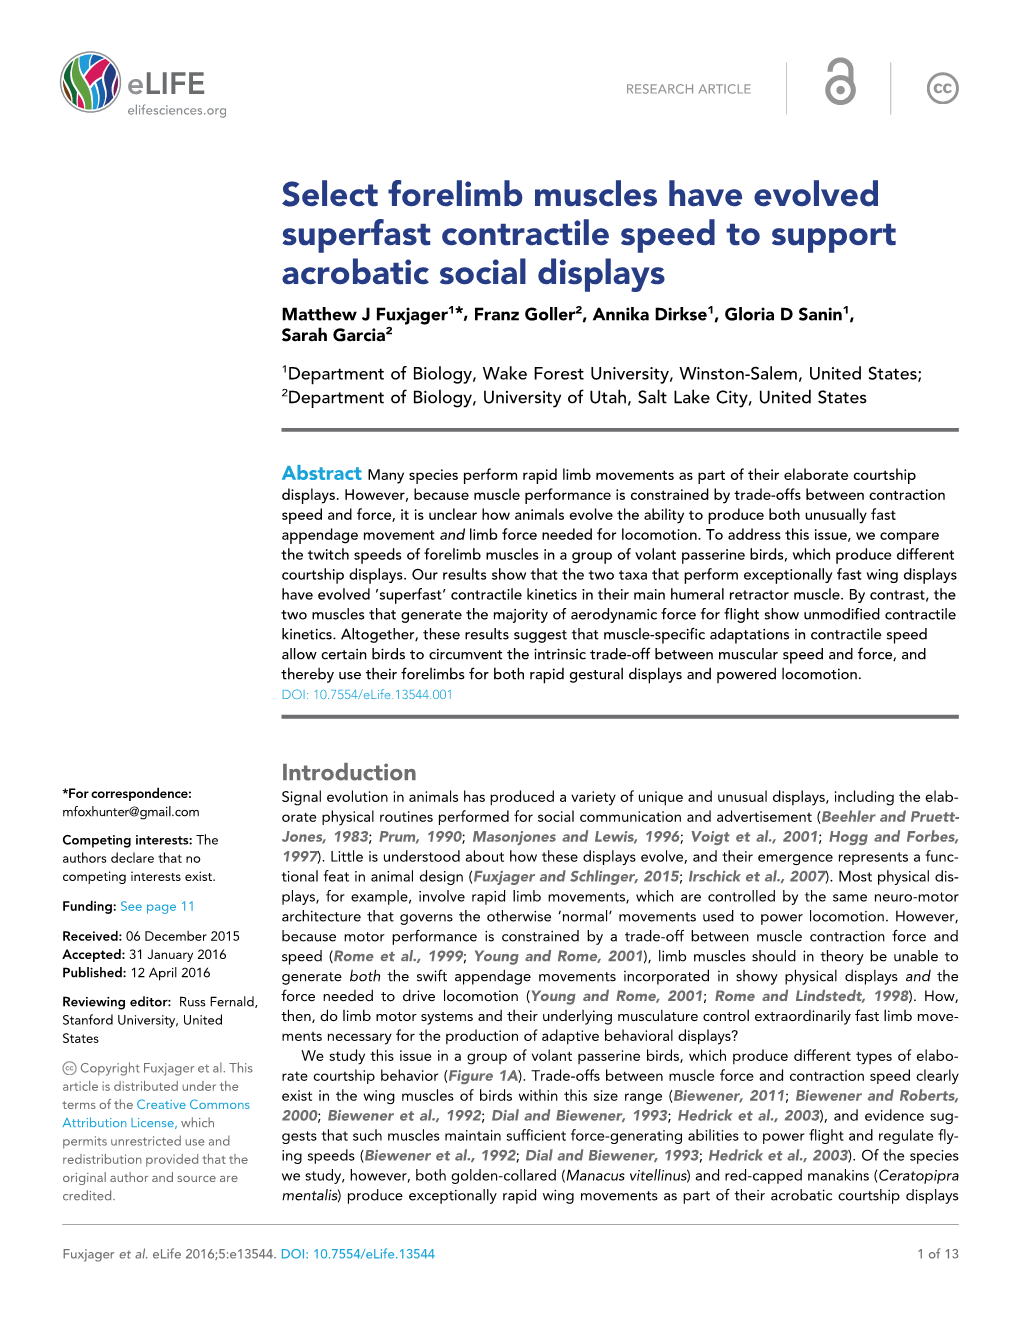 Select Forelimb Muscles Have Evolved Superfast Contractile Speed to Support Acrobatic Social Displays